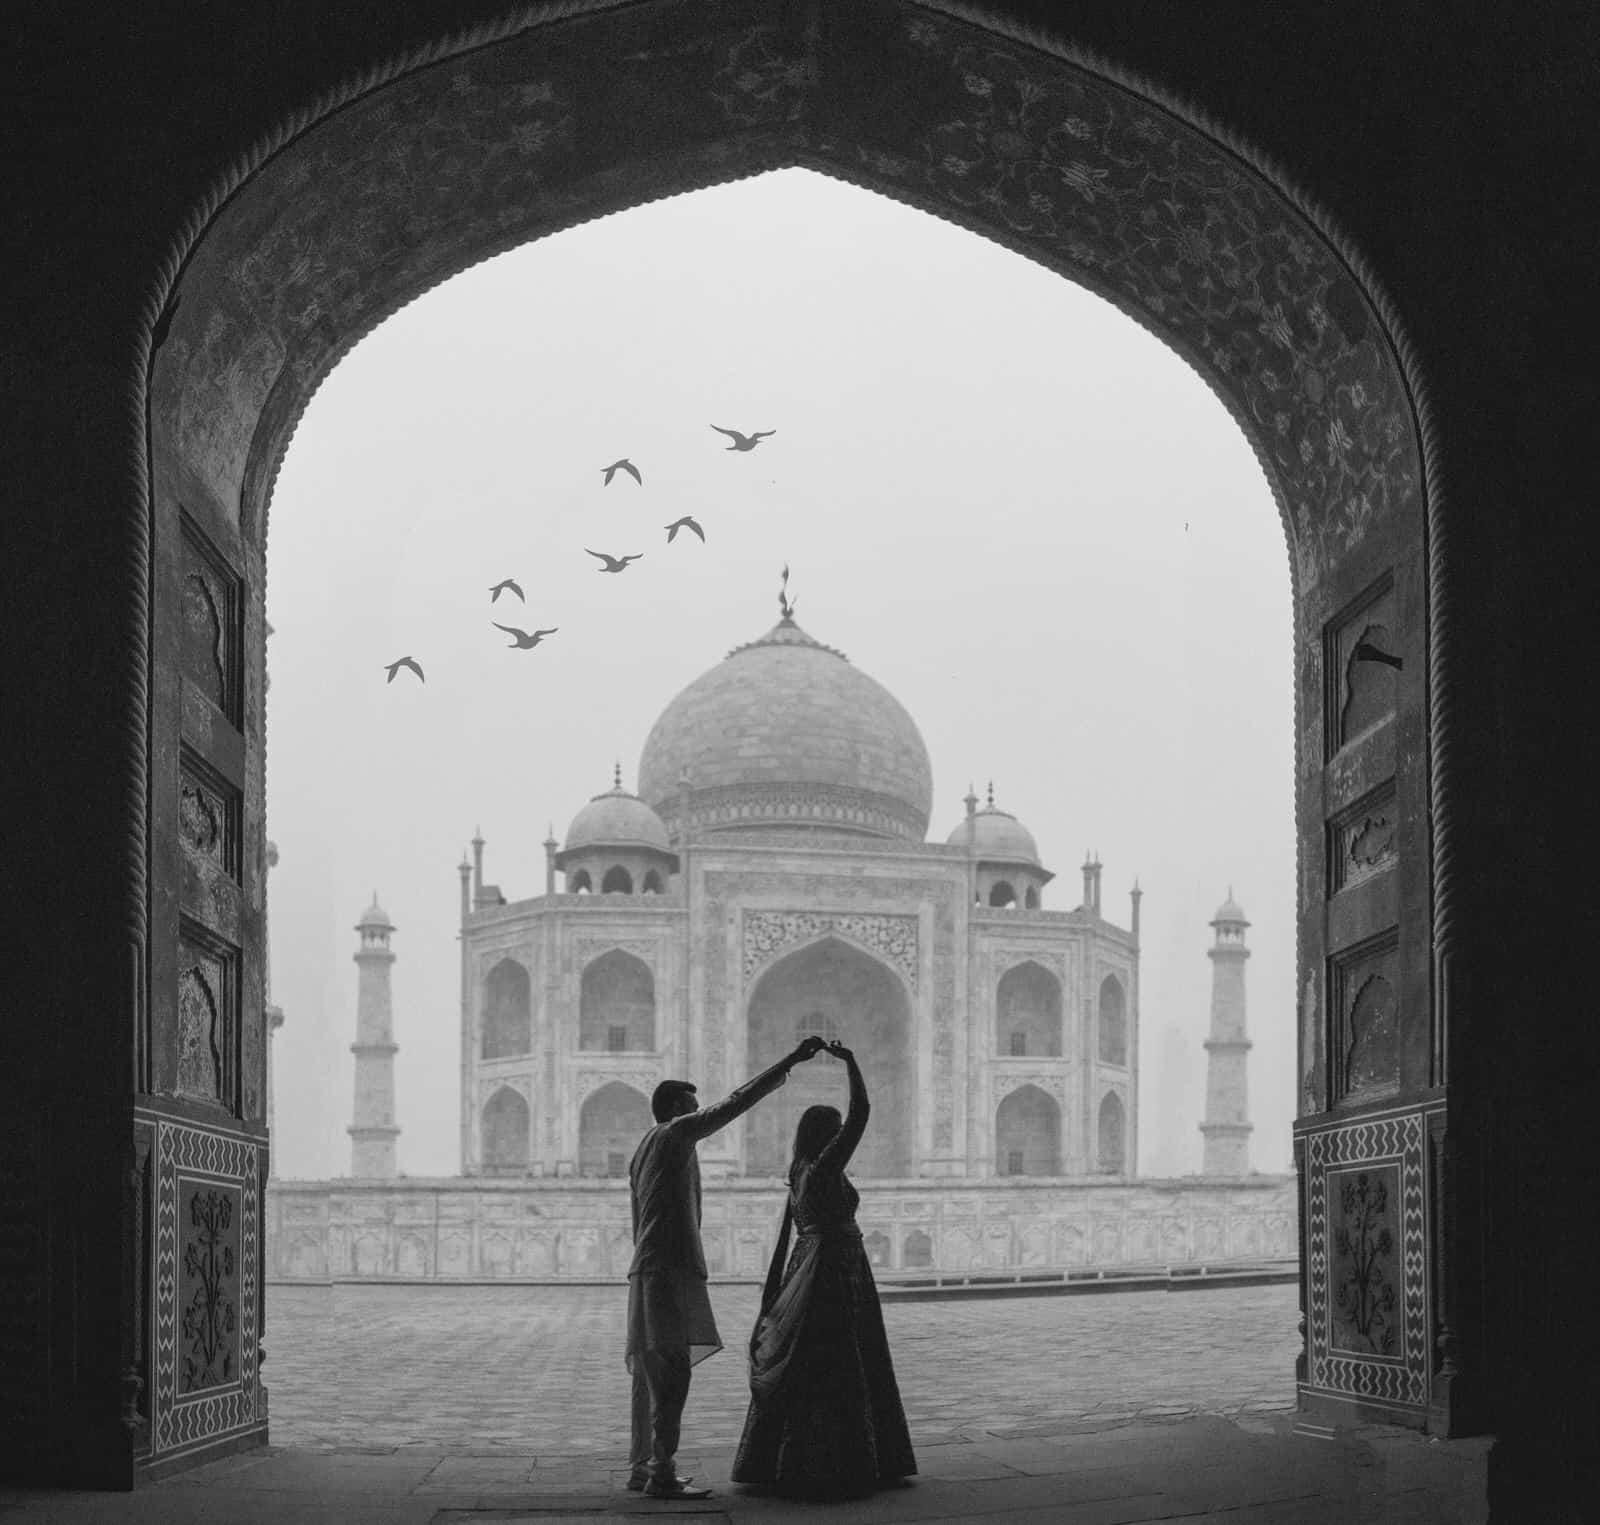 Twirling her under the arch with the Taj Mahal in the Background after their Destination Wedding